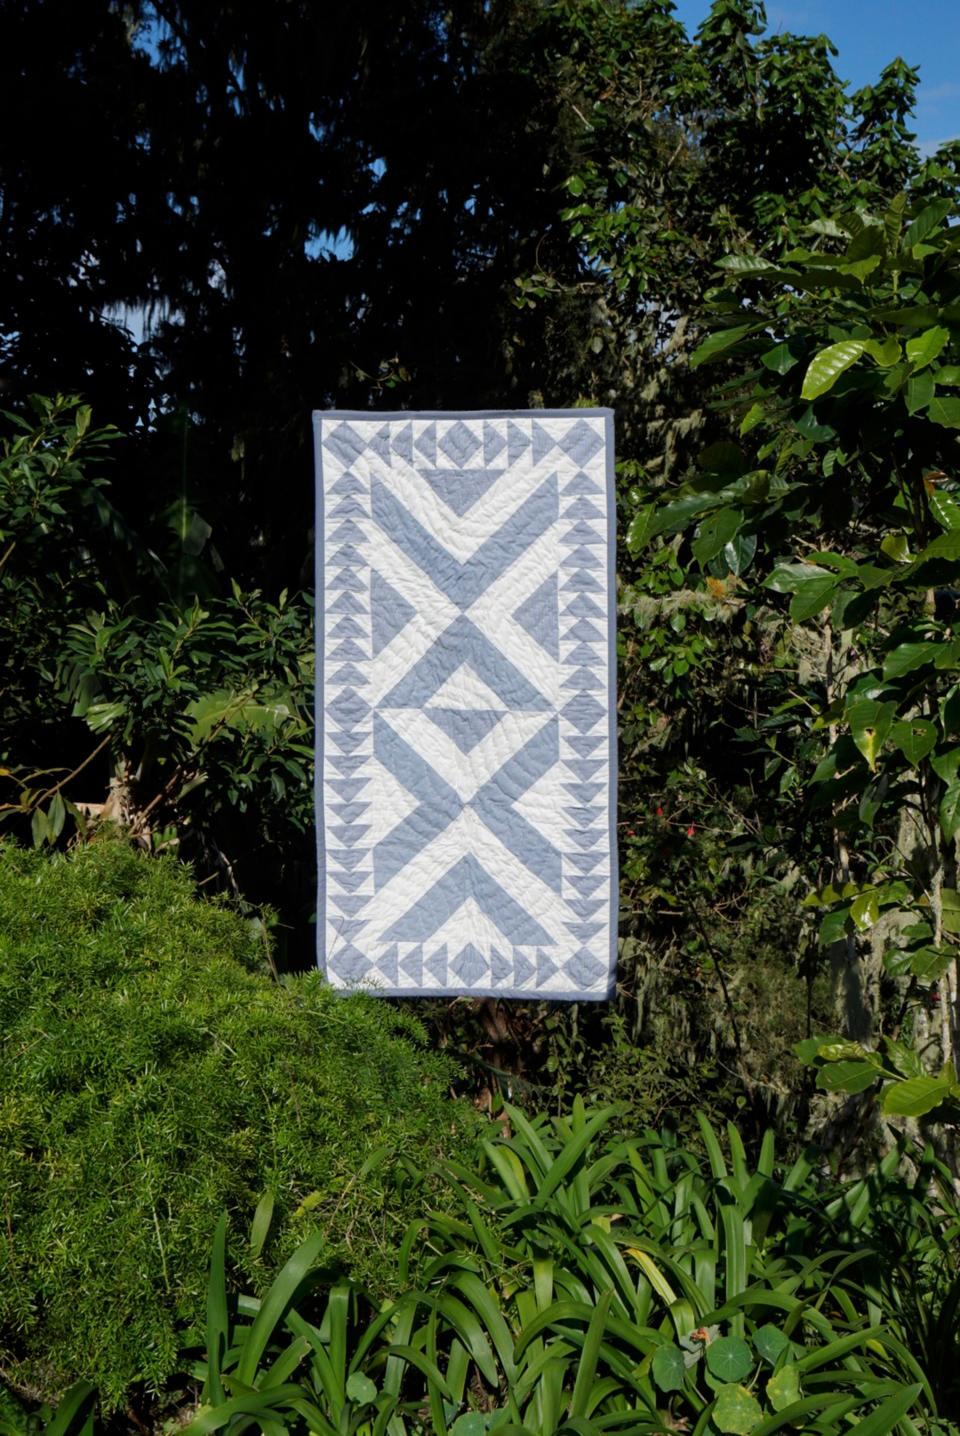 Ogden and photographer Alfredo Piola climbed to top of Blue Mountain Peak, Jamaica’s highest mountain, to photograph the quilts and pillows. Pictured here, the Rondo quilt.